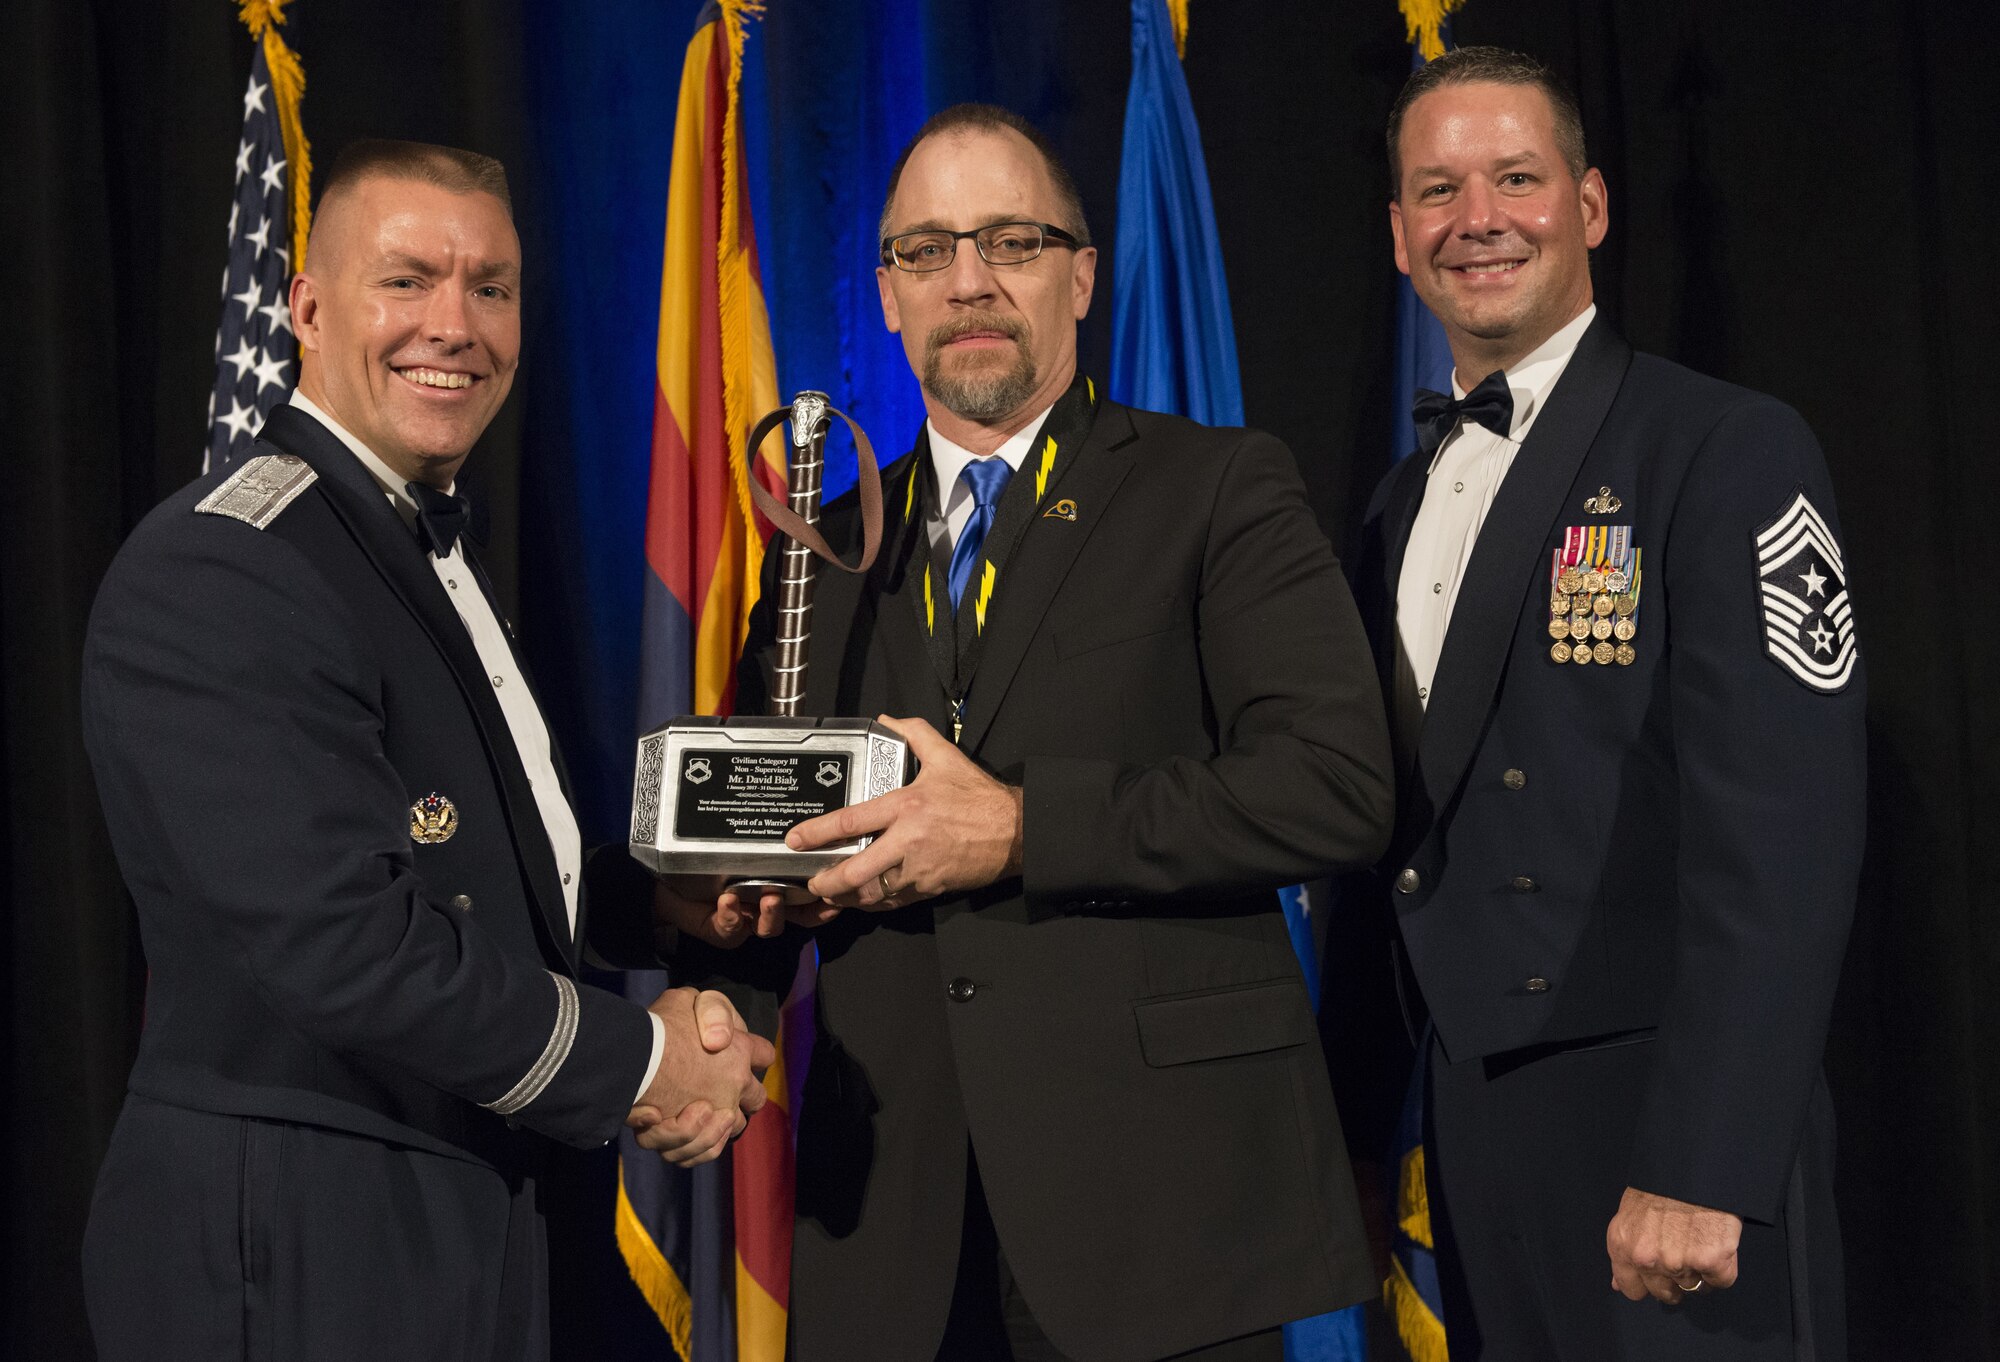 David Bialy, 56th Communications Squadron communications security manager, receives the Category III Non-Supervisory Award from Brig. Gen. Brook Leonard, 56th Fighter Wing commander and Chief Master Sergeant Randy Kwiatkowski, 56th FW command chief, at the 2017 Annual Awards Banquet in Litchfield Park, Ariz., Jan. 20, 2018. The banquet was held to recognize and award the top performing Airmen from Luke Air Force Base. (U.S. Air Force Photo/Airman 1st Class Alexander Cook)